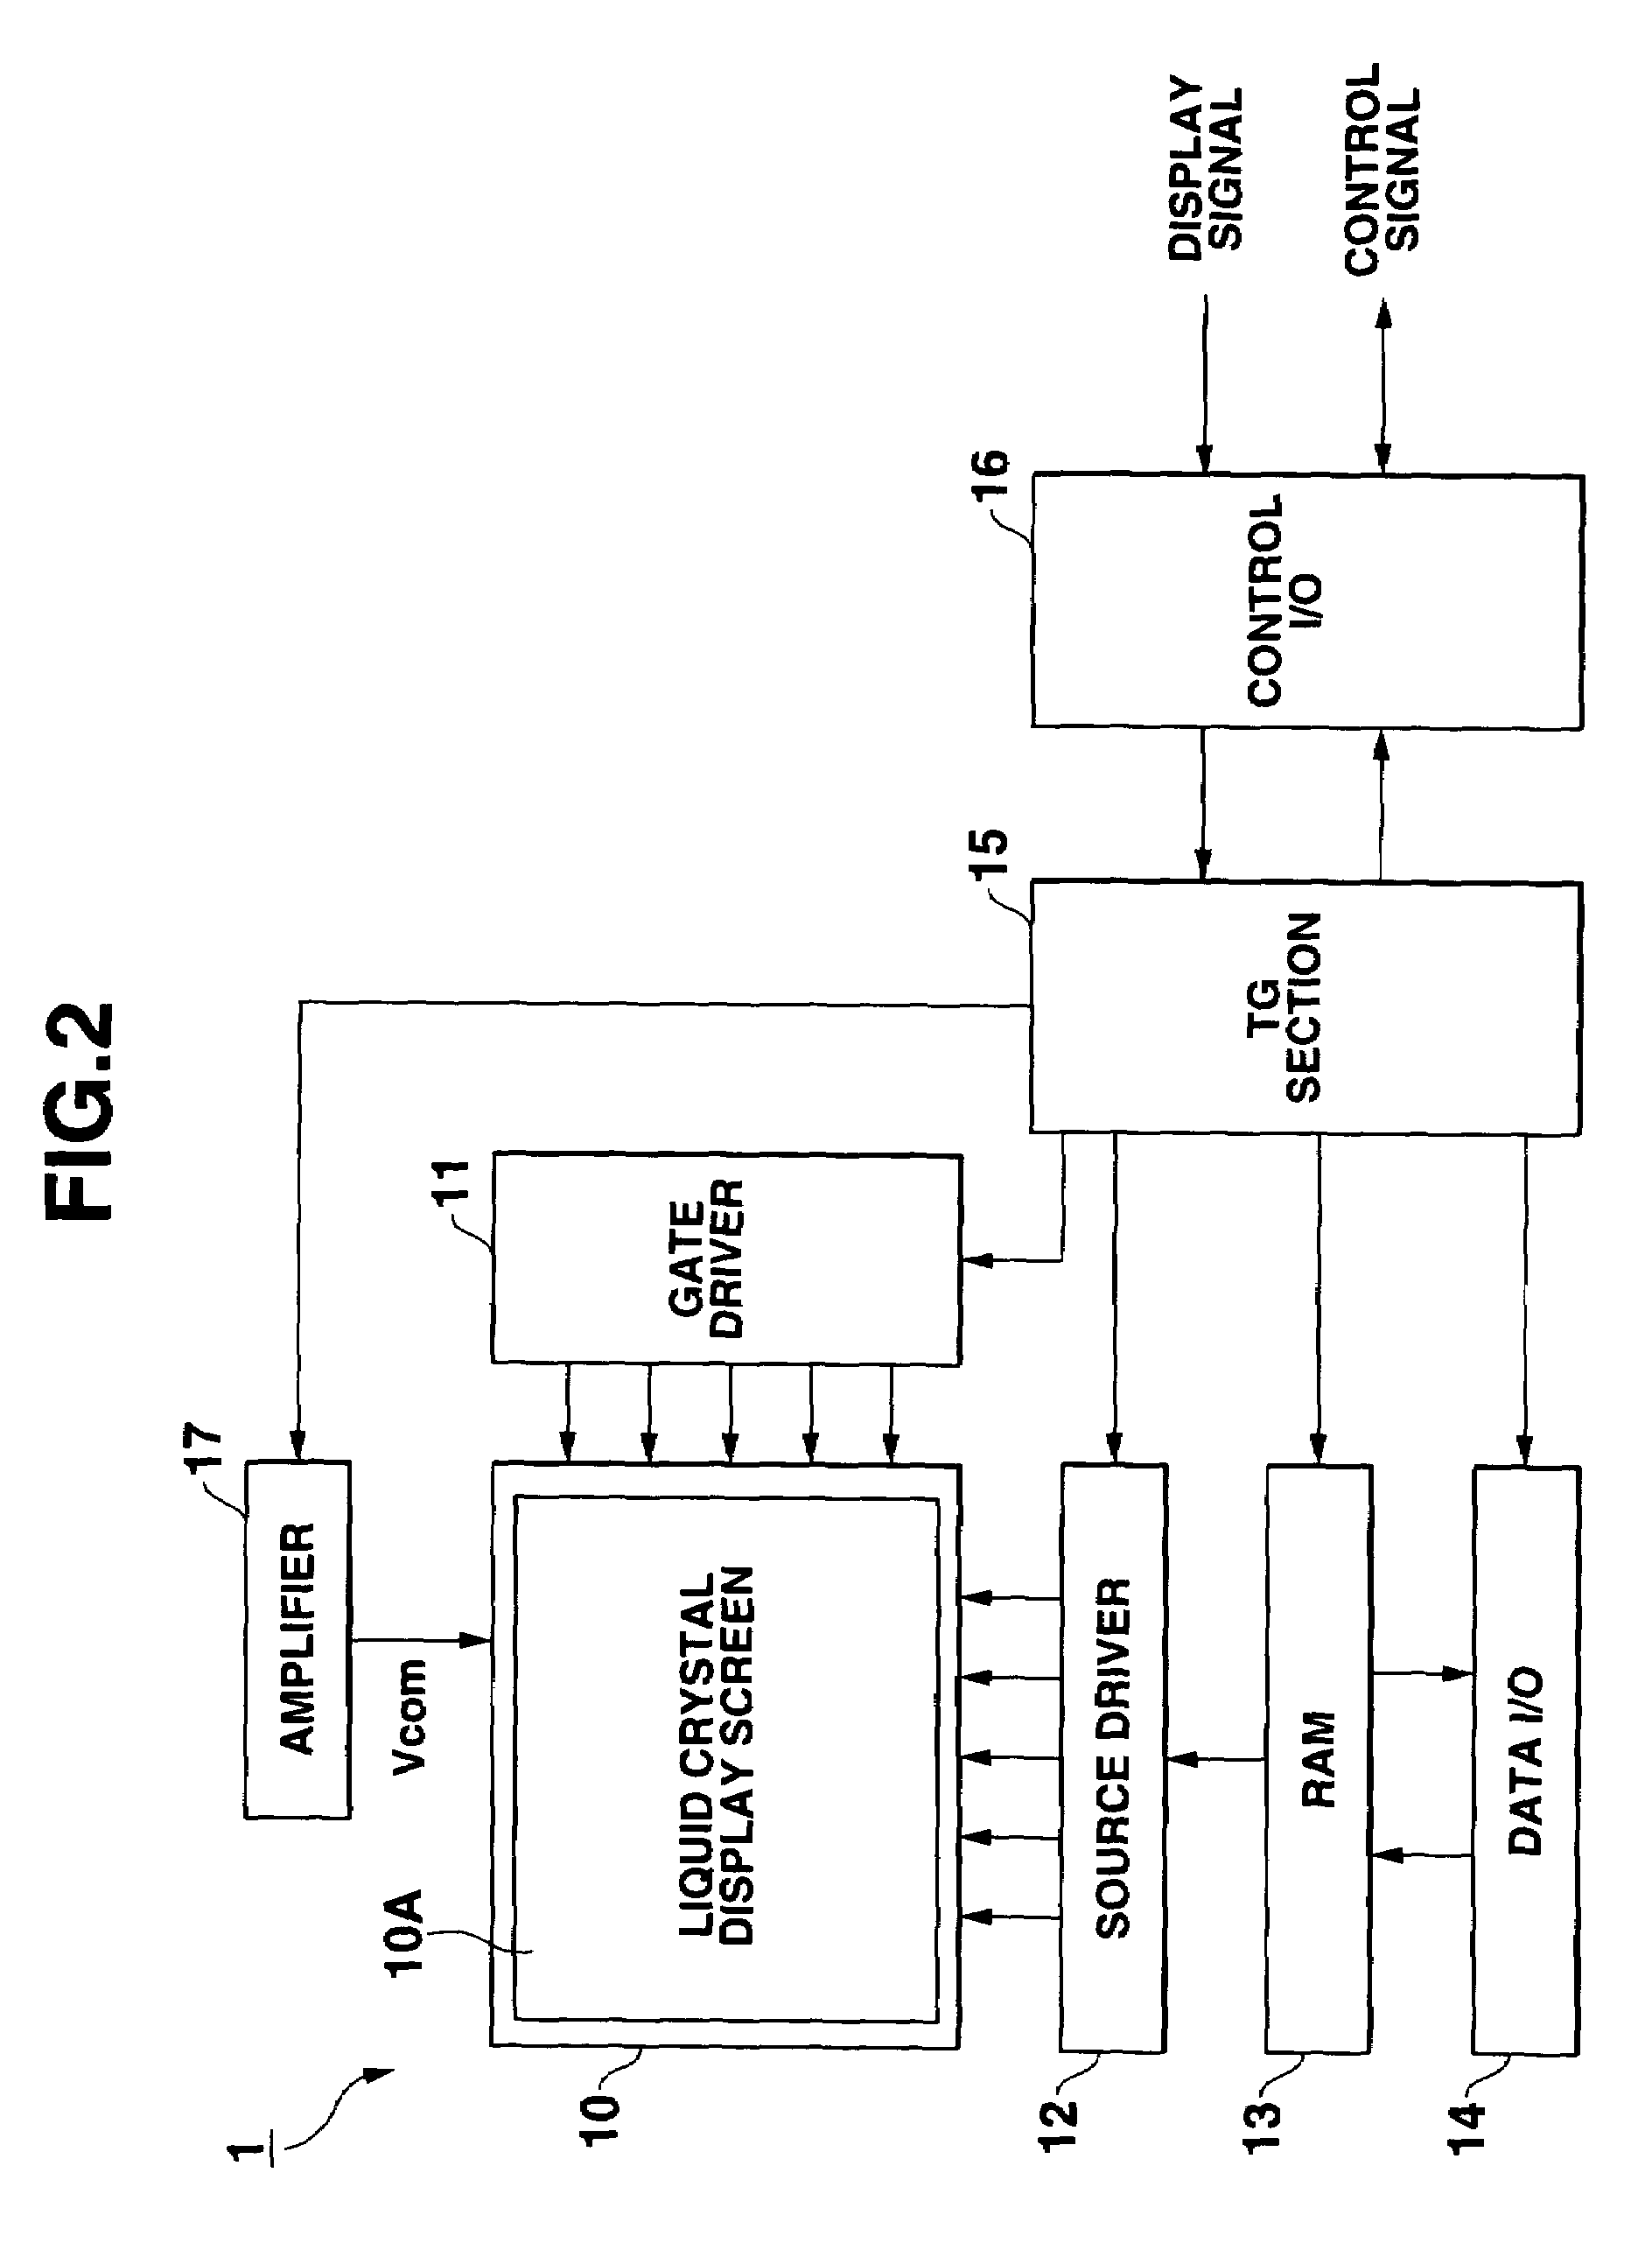 Display device and control system thereof